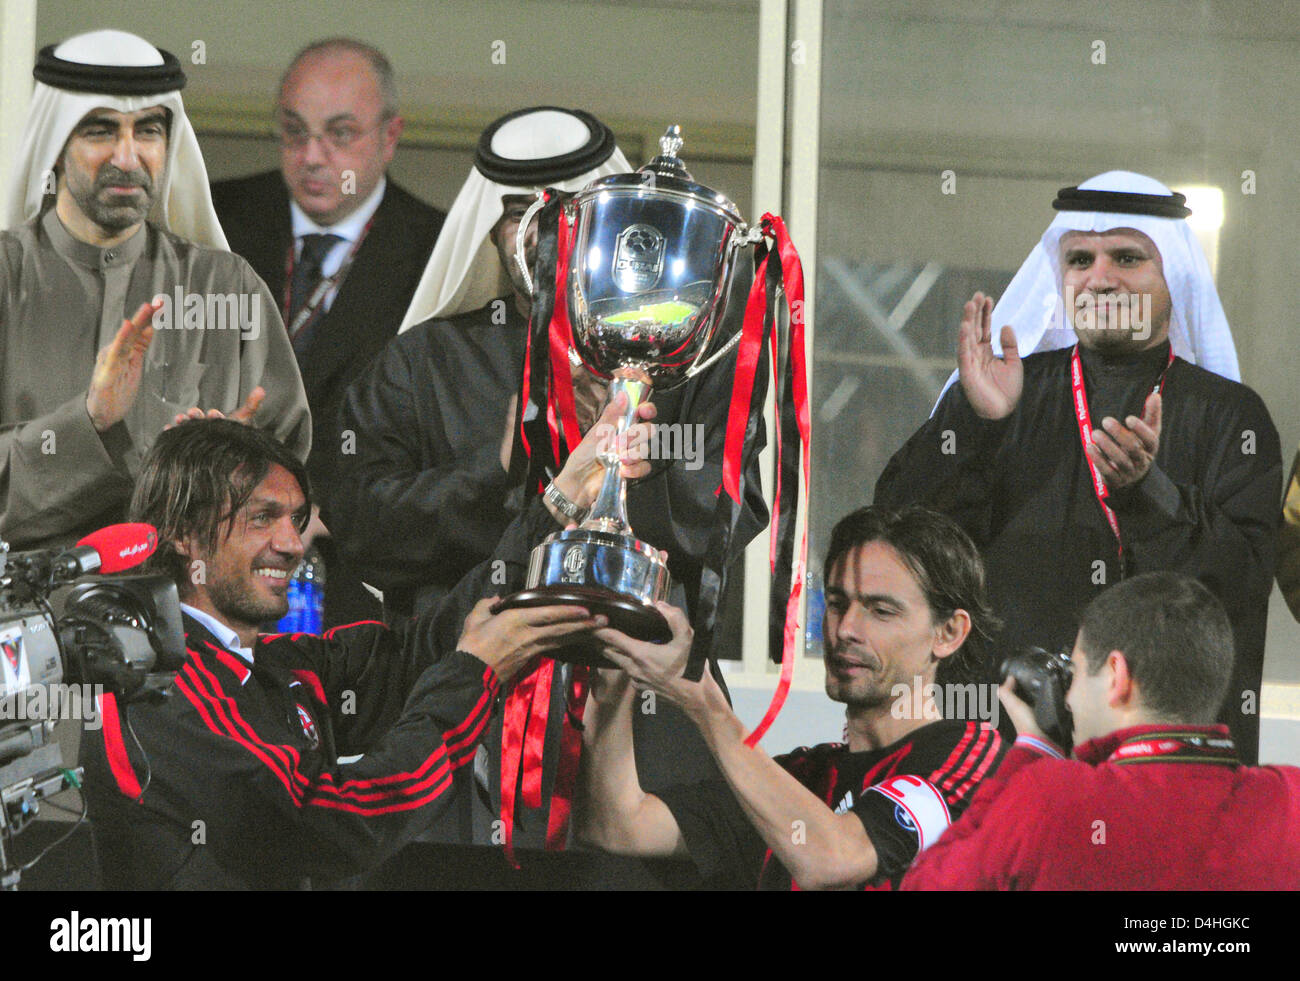 A.C. Milan players Paolo Maldini (L) and Massimo Ambrosini present the trophy after winning the friendly match against Hamburger SV at Sevens Stadium in Dubai, UAE, 06 January 2009. Milan defeated Hamburg on penalties 5-4. Photo: Stefan Puchner Stock Photo